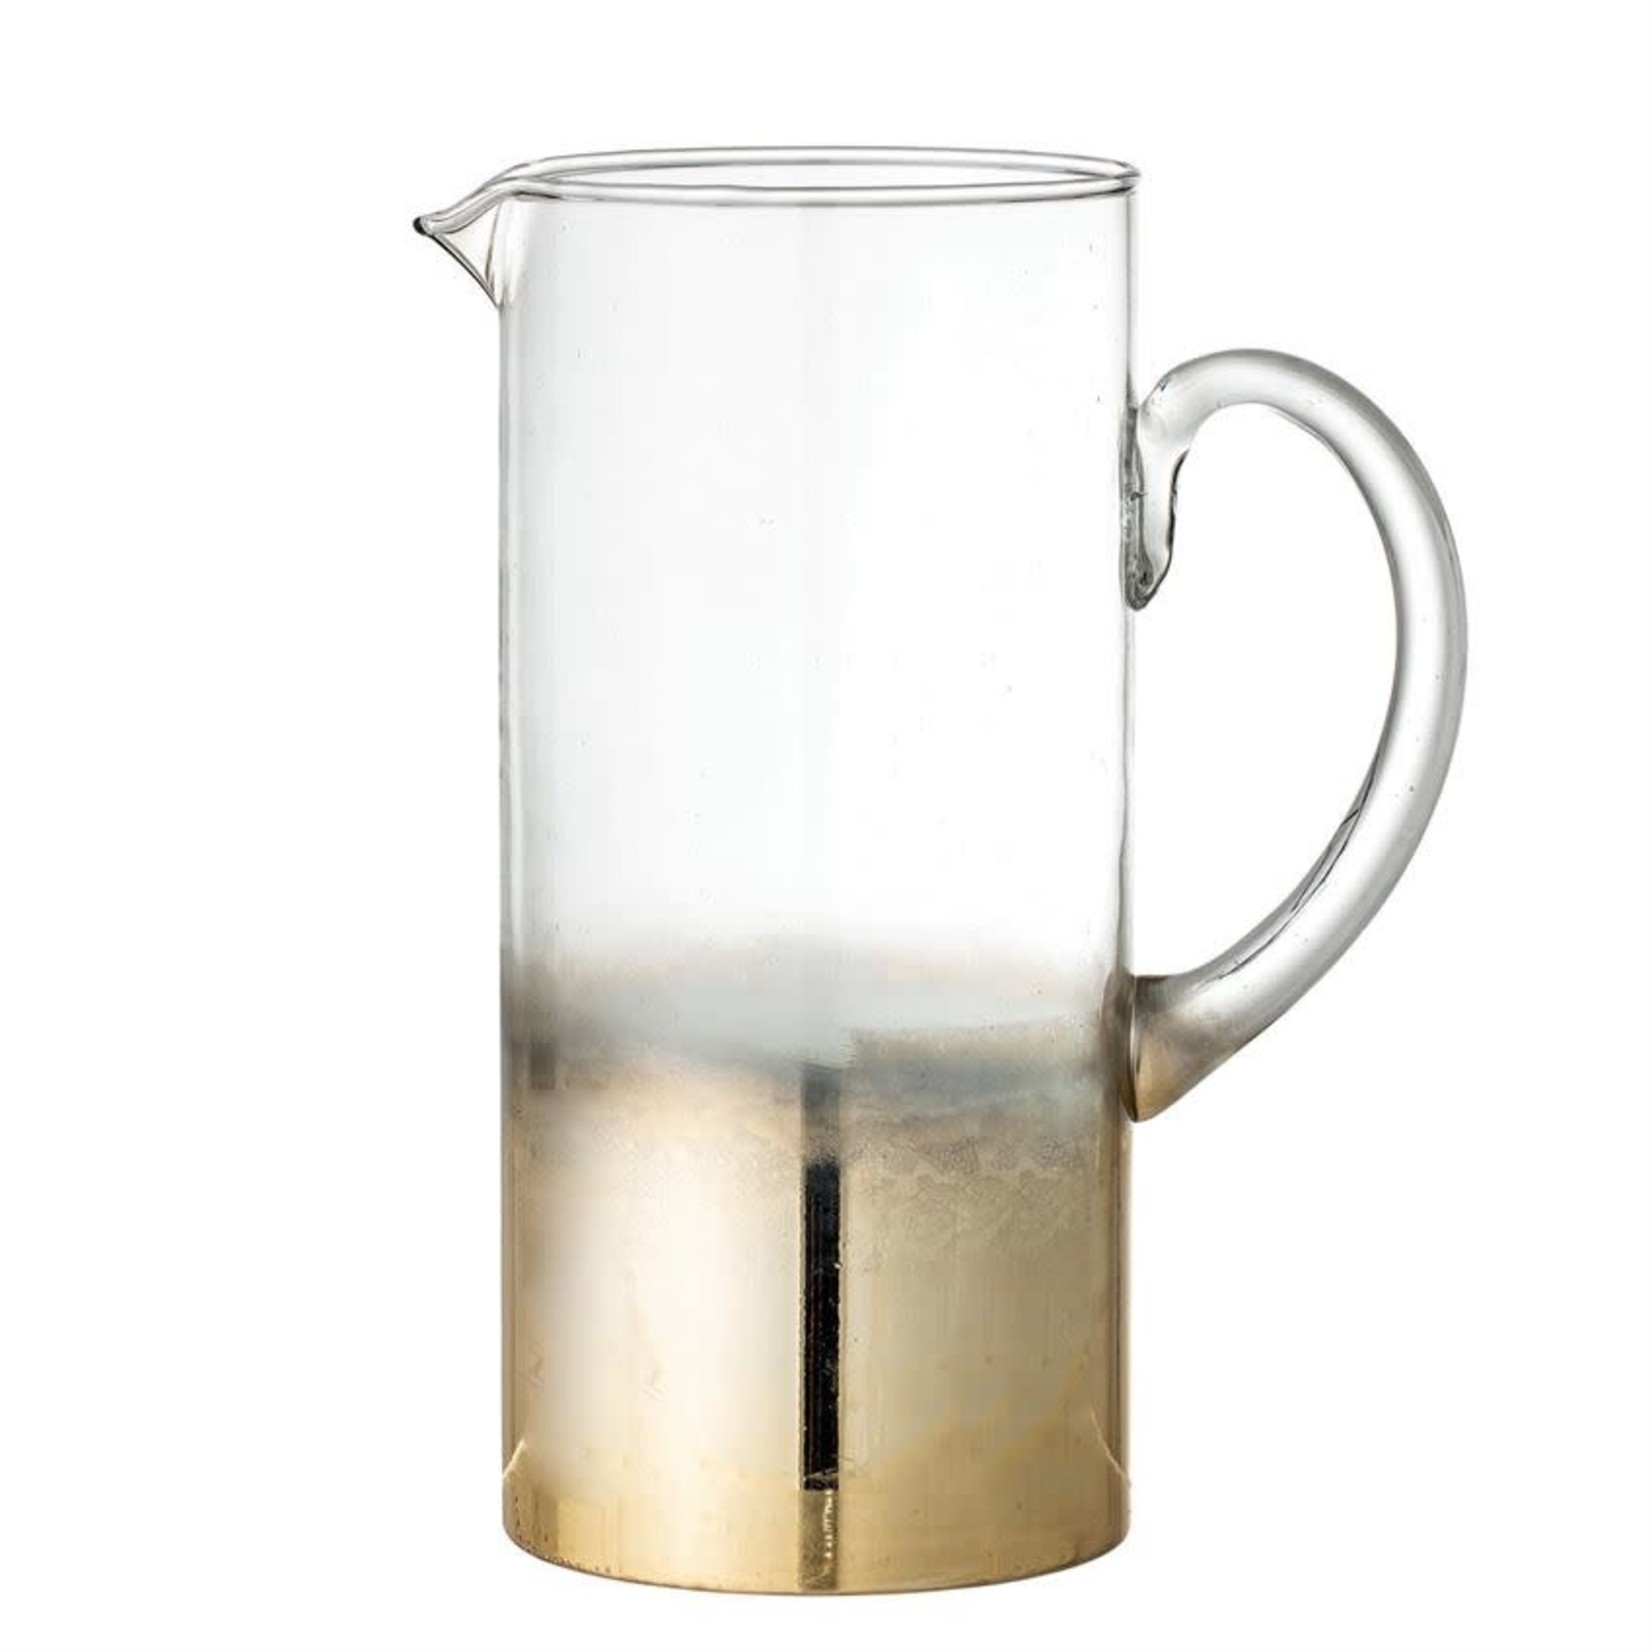 BLOOMINGVILLE GLASS PITCHER W/ GOLD OMBRE FINISH